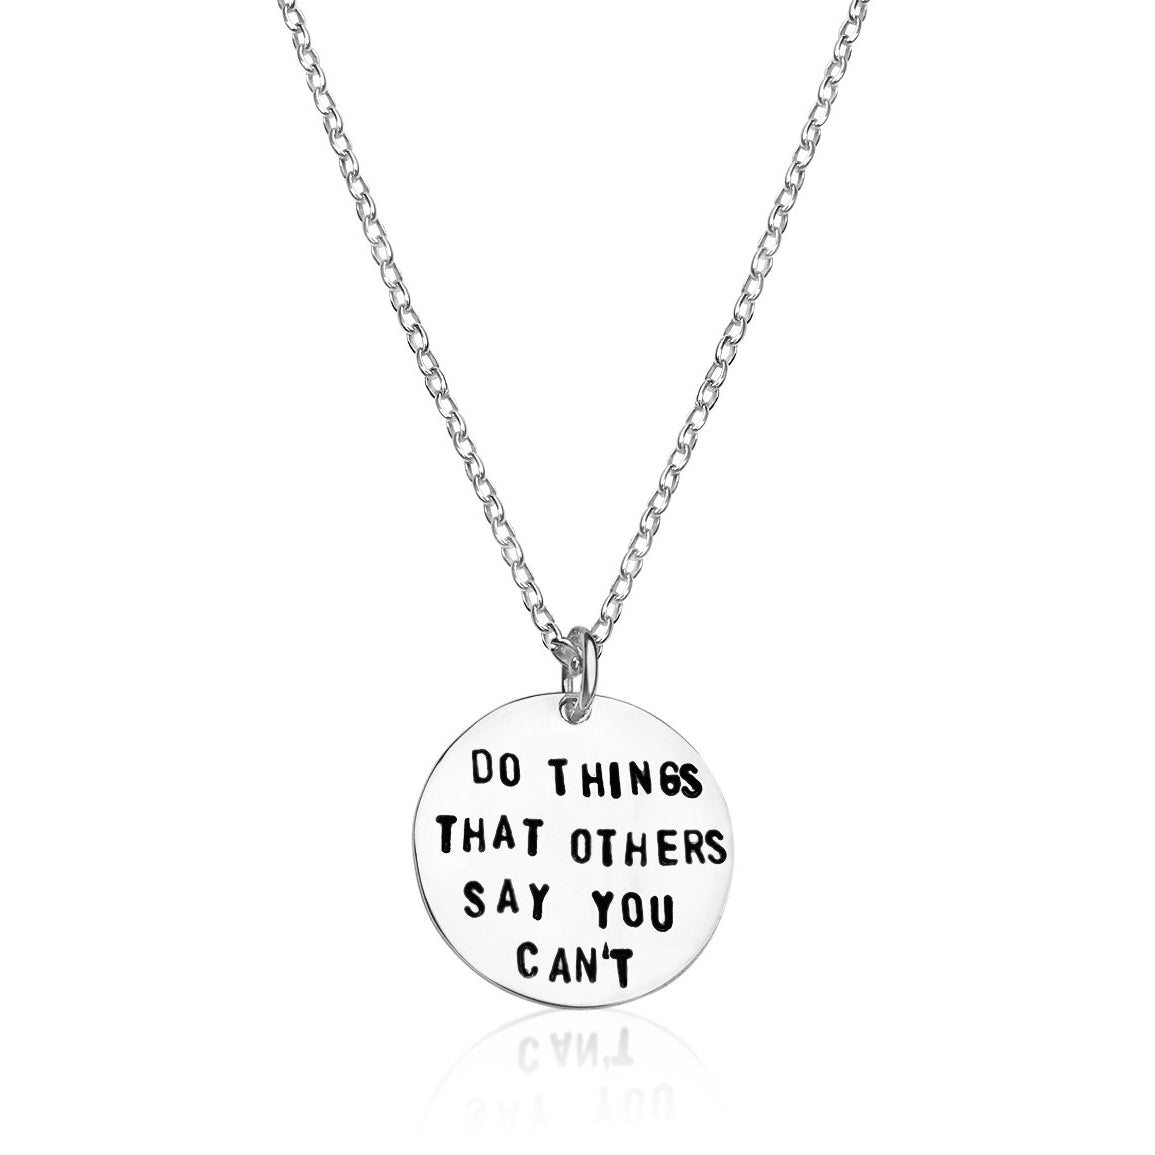 Inspirational Do Things Others Say You Can't Necklace